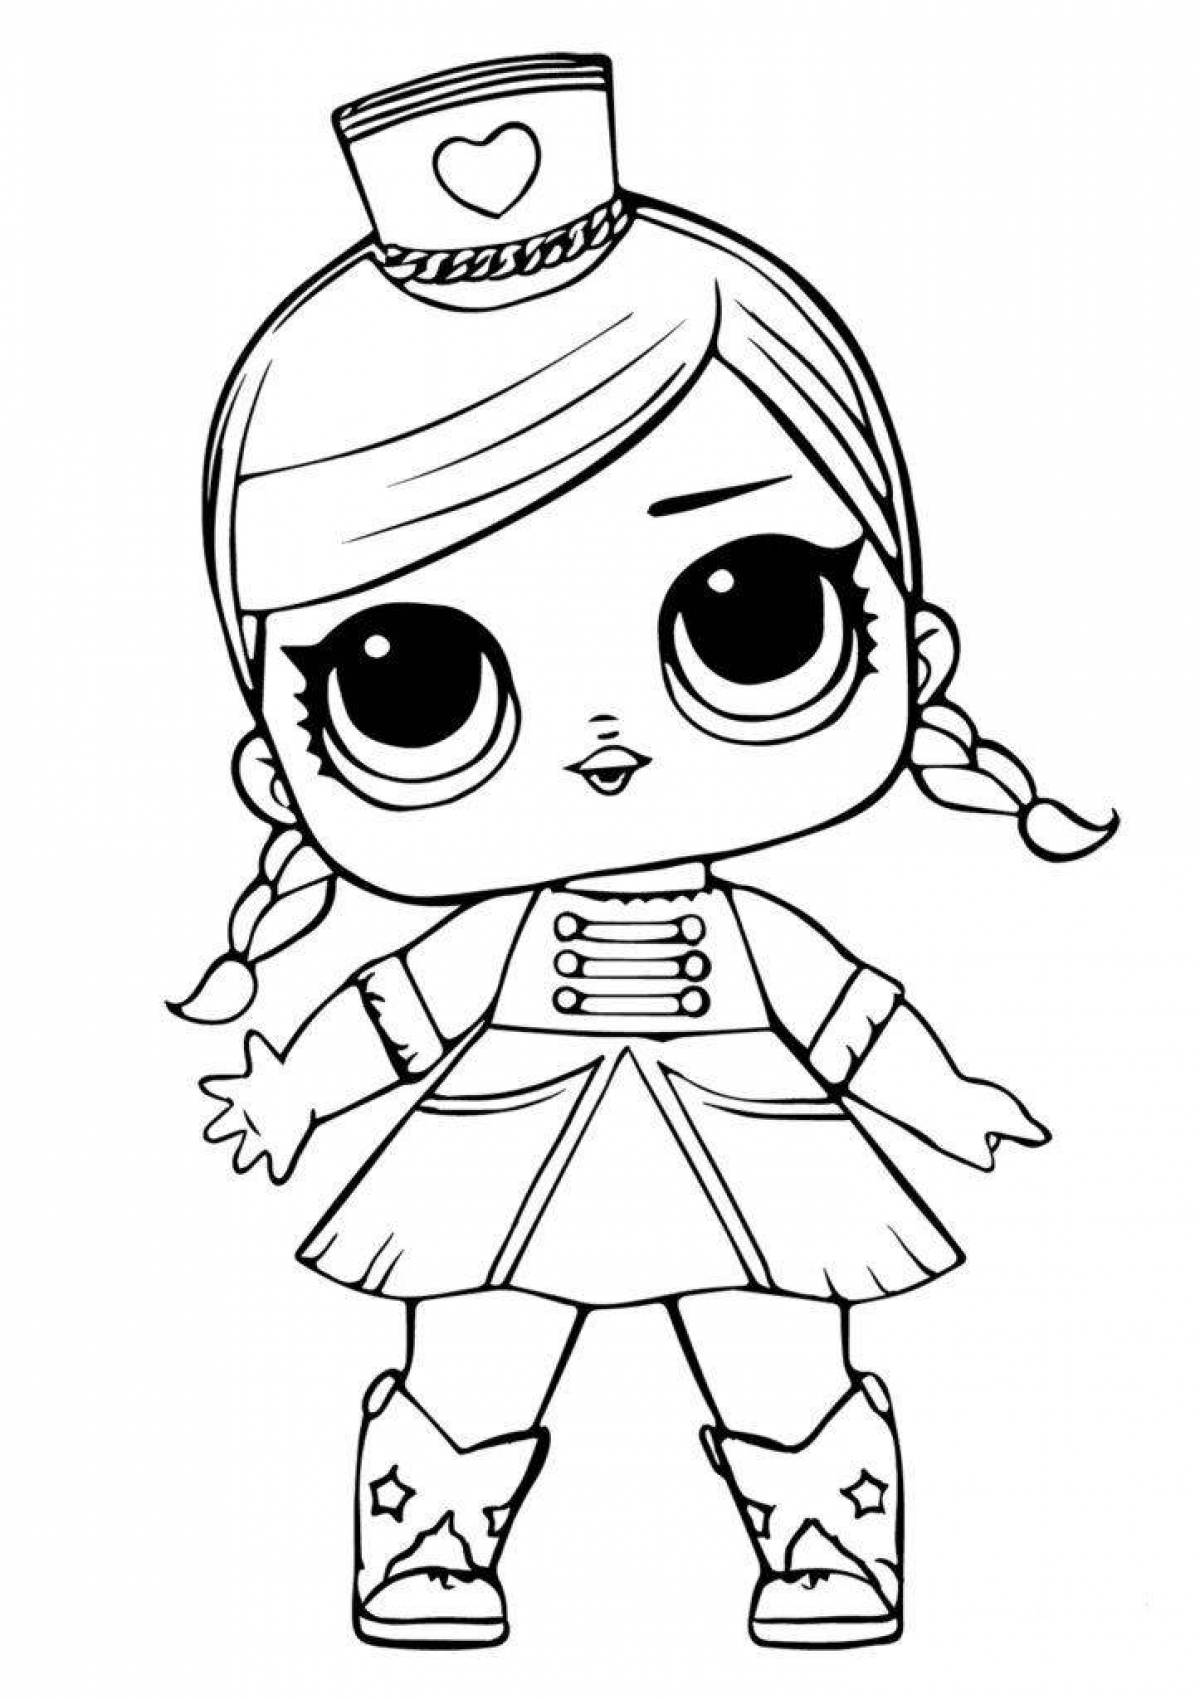 Exuberant coloring page lol doll coloring book